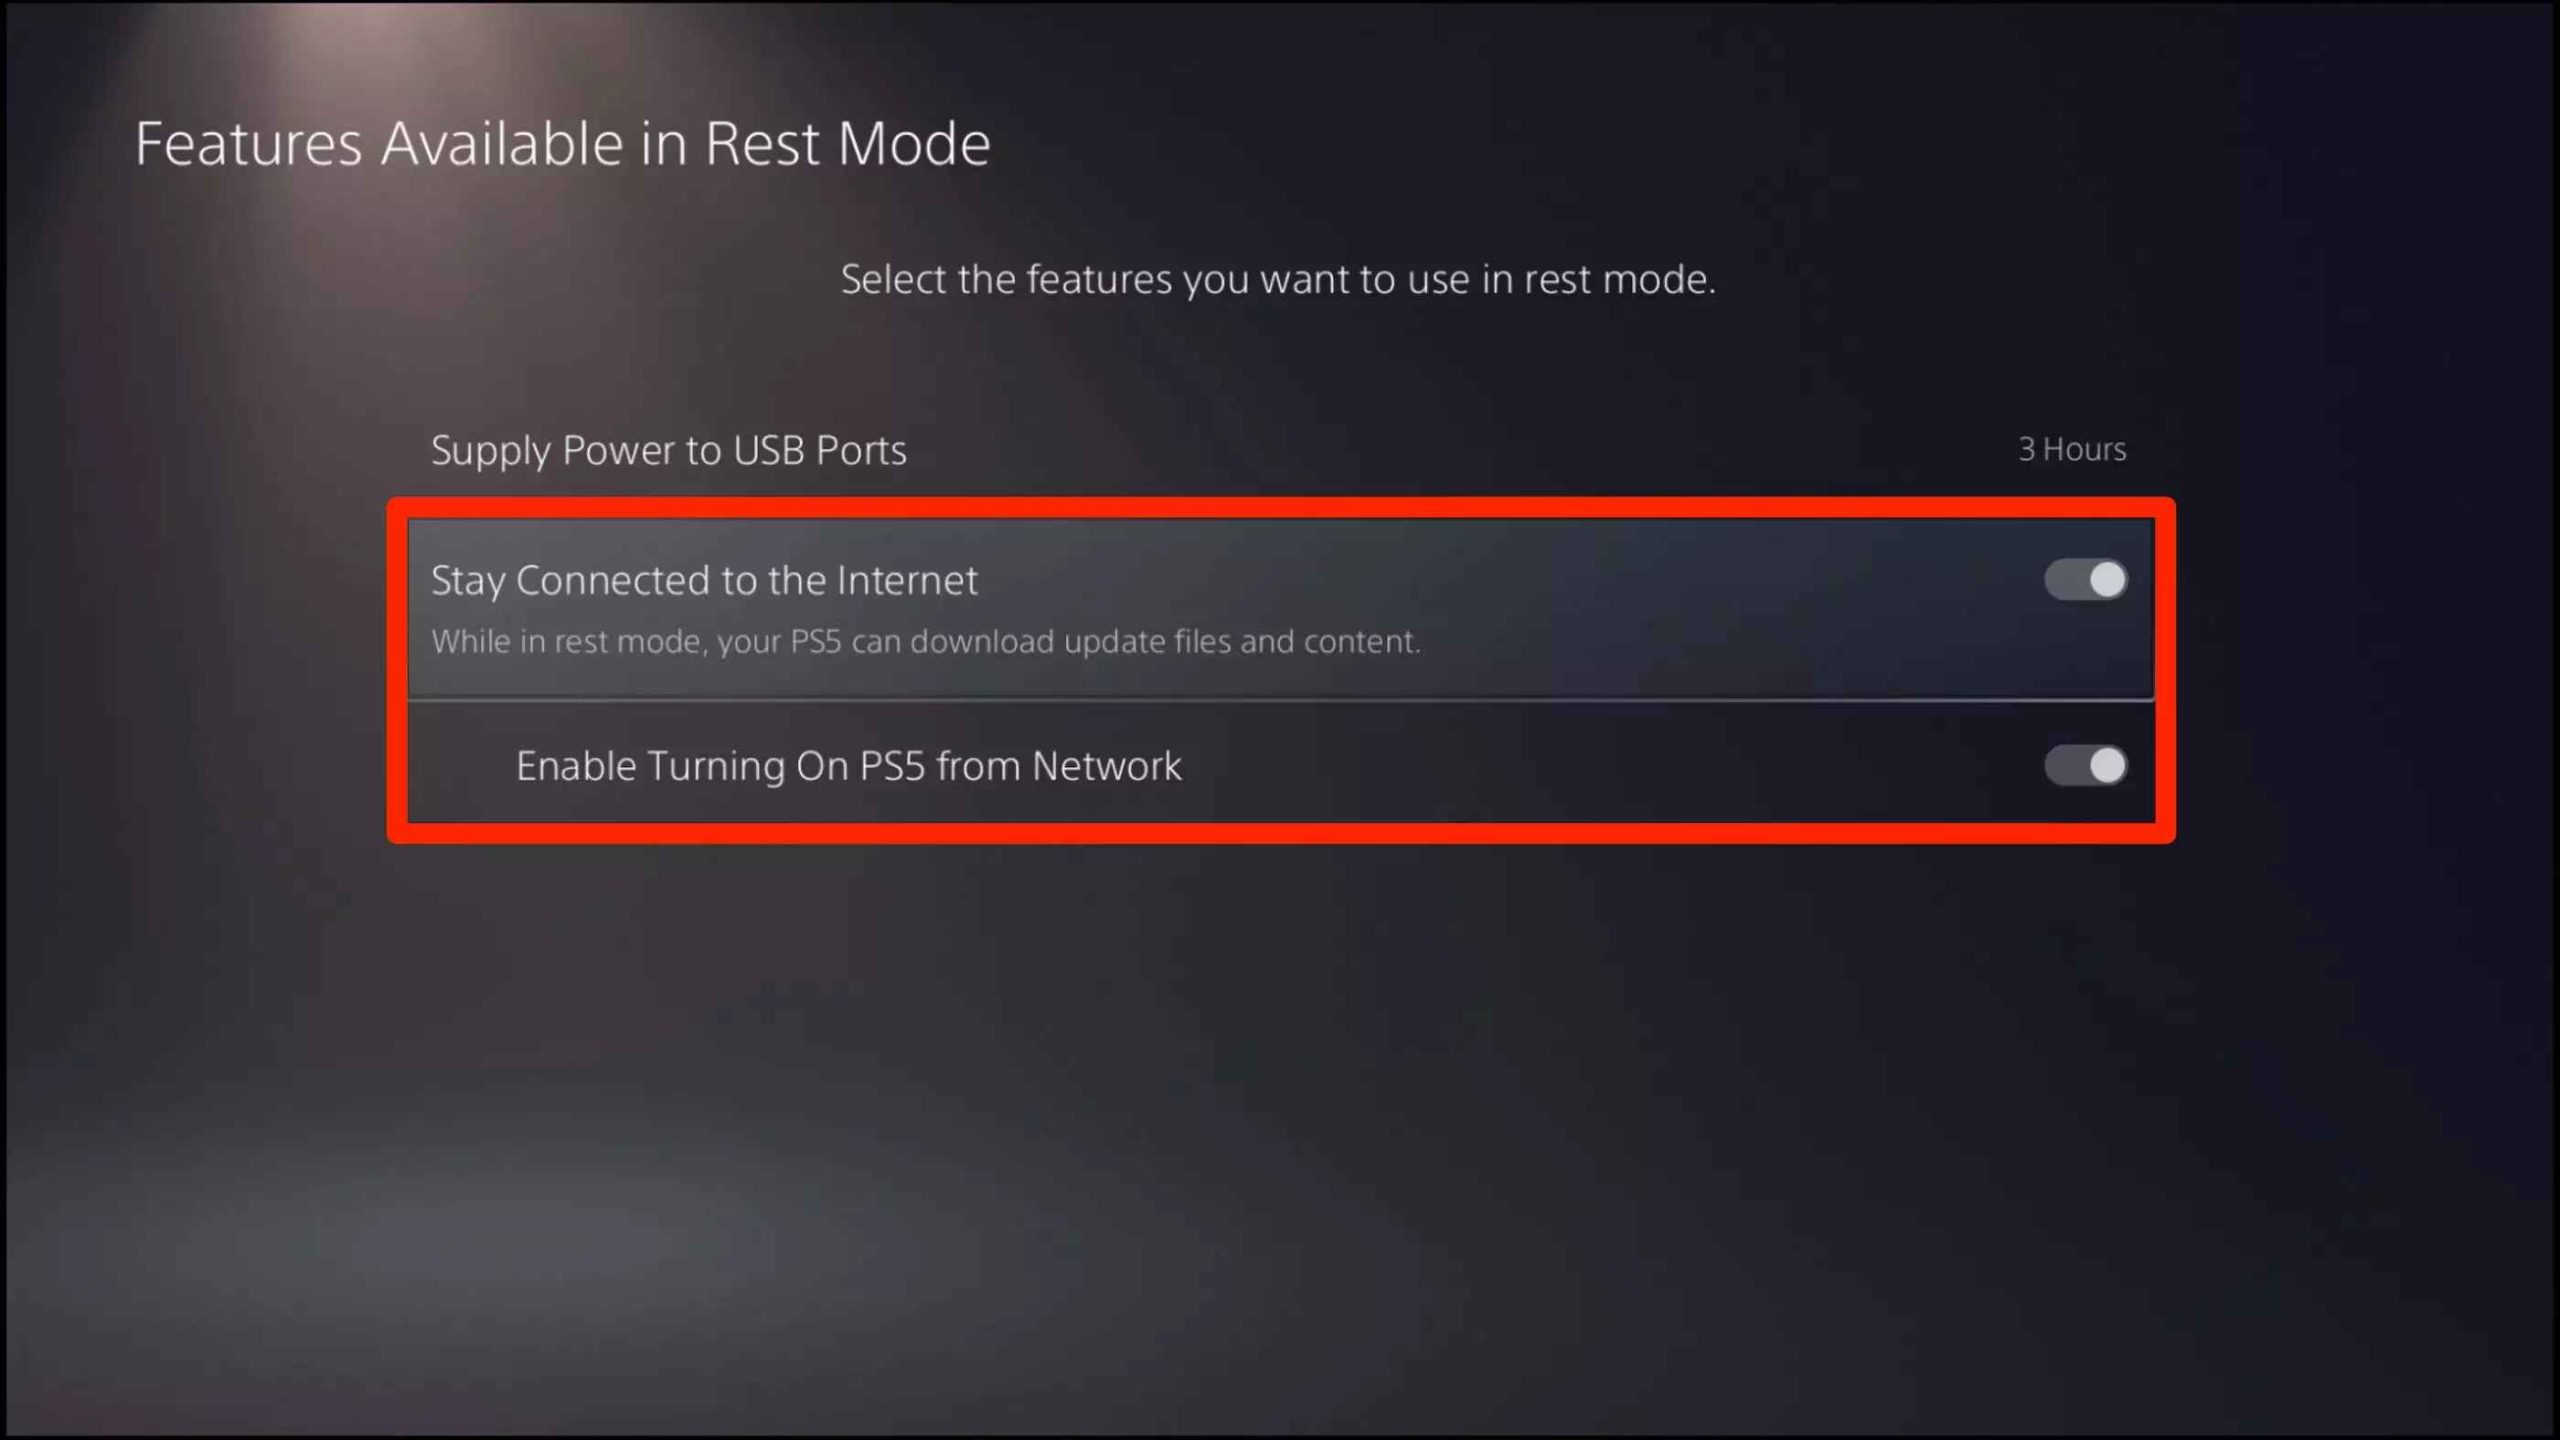 enable the features available in rest mode